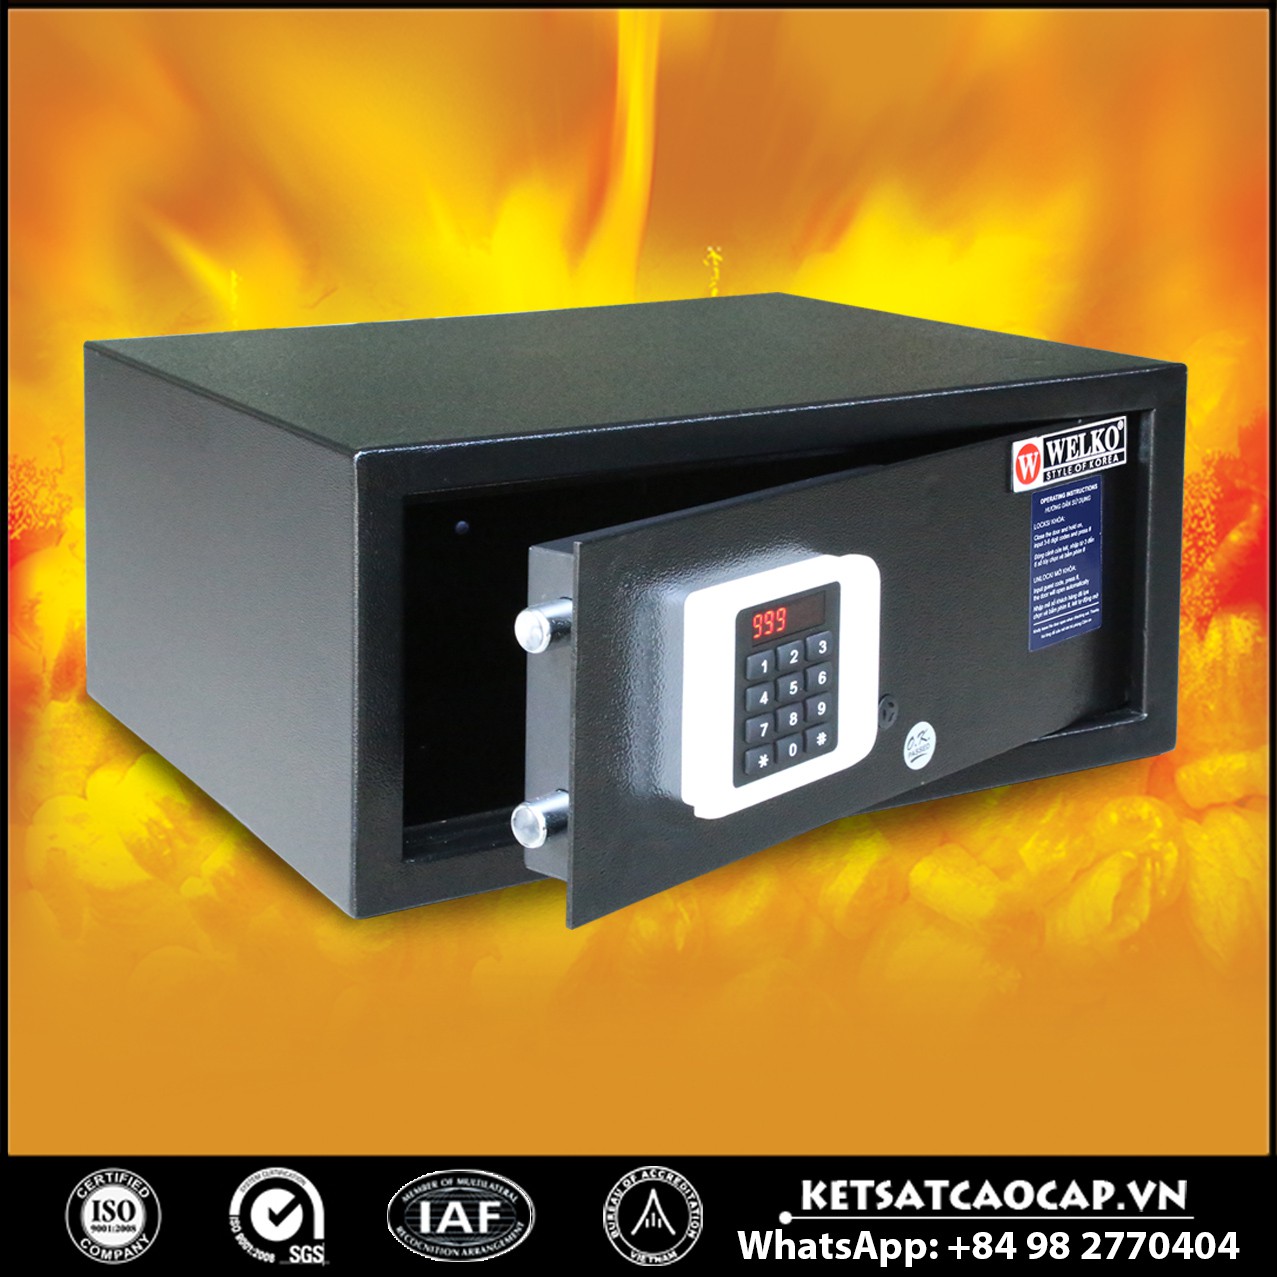 Hotel Safety Deposit Box Suppliers and Exporters